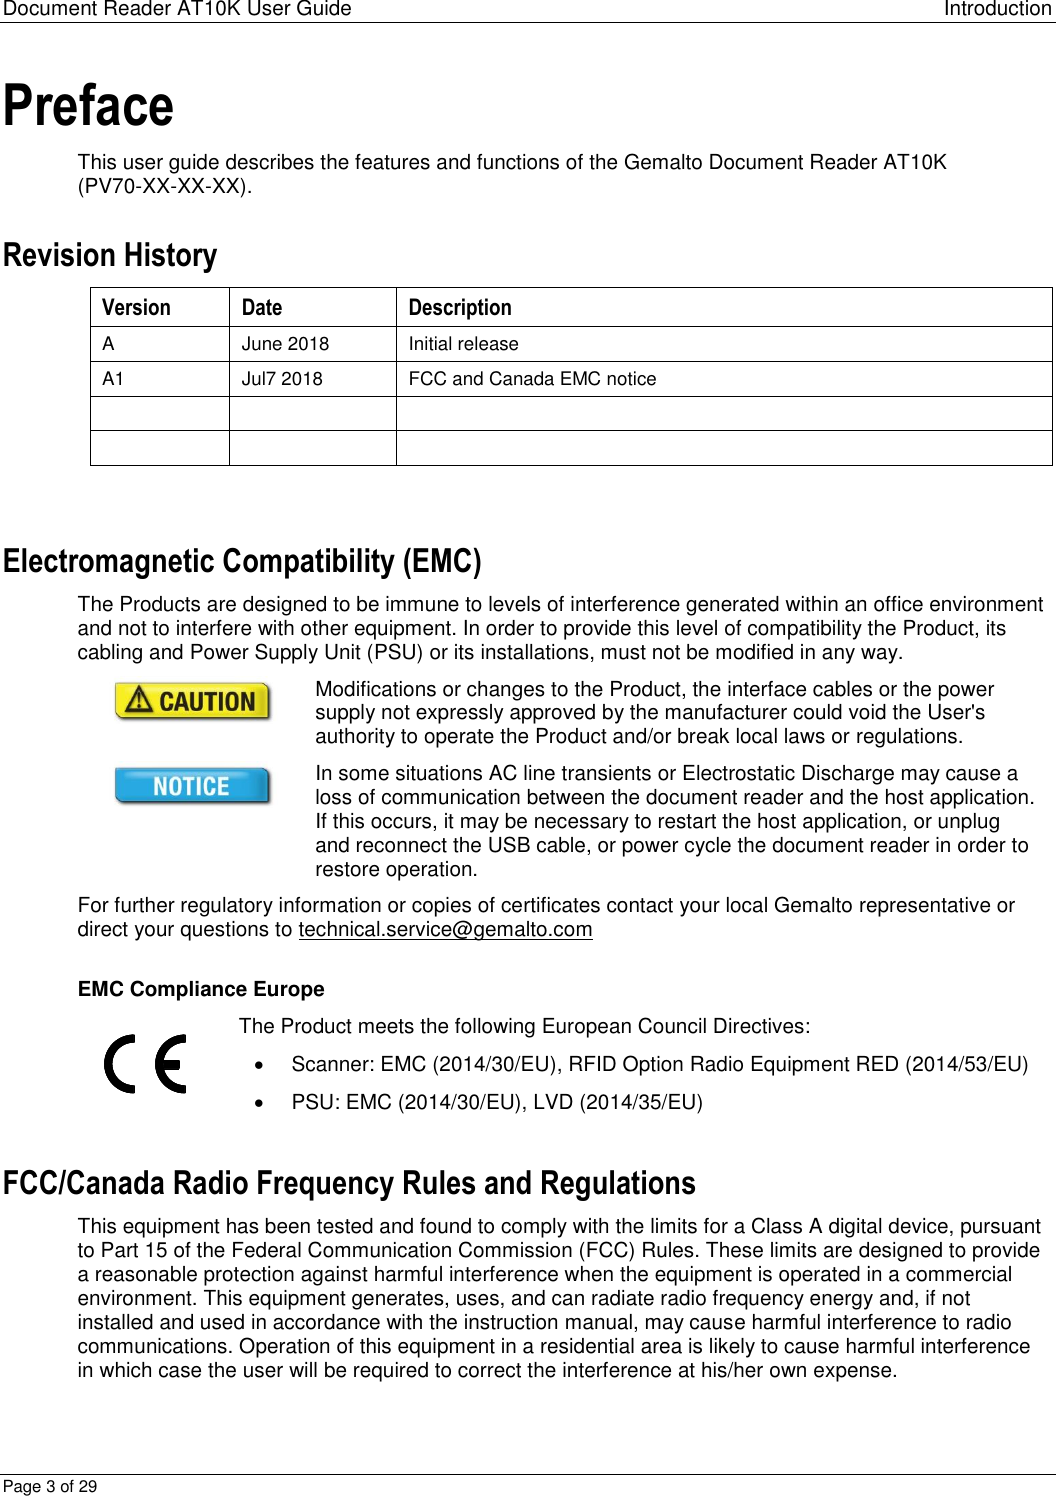 Document Reader AT10K User Guide Introduction Page 3 of 29 Preface This user guide describes the features and functions of the Gemalto Document Reader AT10K (PV70-XX-XX-XX). Revision History Version Date Description A June 2018 Initial release A1 Jul7 2018 FCC and Canada EMC notice        Electromagnetic Compatibility (EMC) The Products are designed to be immune to levels of interference generated within an office environment and not to interfere with other equipment. In order to provide this level of compatibility the Product, its cabling and Power Supply Unit (PSU) or its installations, must not be modified in any way.  Modifications or changes to the Product, the interface cables or the power supply not expressly approved by the manufacturer could void the User&apos;s authority to operate the Product and/or break local laws or regulations.  In some situations AC line transients or Electrostatic Discharge may cause a loss of communication between the document reader and the host application. If this occurs, it may be necessary to restart the host application, or unplug and reconnect the USB cable, or power cycle the document reader in order to restore operation. For further regulatory information or copies of certificates contact your local Gemalto representative or direct your questions to technical.service@gemalto.com  EMC Compliance Europe  The Product meets the following European Council Directives:    Scanner: EMC (2014/30/EU), RFID Option Radio Equipment RED (2014/53/EU)   PSU: EMC (2014/30/EU), LVD (2014/35/EU) FCC/Canada Radio Frequency Rules and Regulations This equipment has been tested and found to comply with the limits for a Class A digital device, pursuant to Part 15 of the Federal Communication Commission (FCC) Rules. These limits are designed to provide a reasonable protection against harmful interference when the equipment is operated in a commercial environment. This equipment generates, uses, and can radiate radio frequency energy and, if not installed and used in accordance with the instruction manual, may cause harmful interference to radio communications. Operation of this equipment in a residential area is likely to cause harmful interference in which case the user will be required to correct the interference at his/her own expense. 